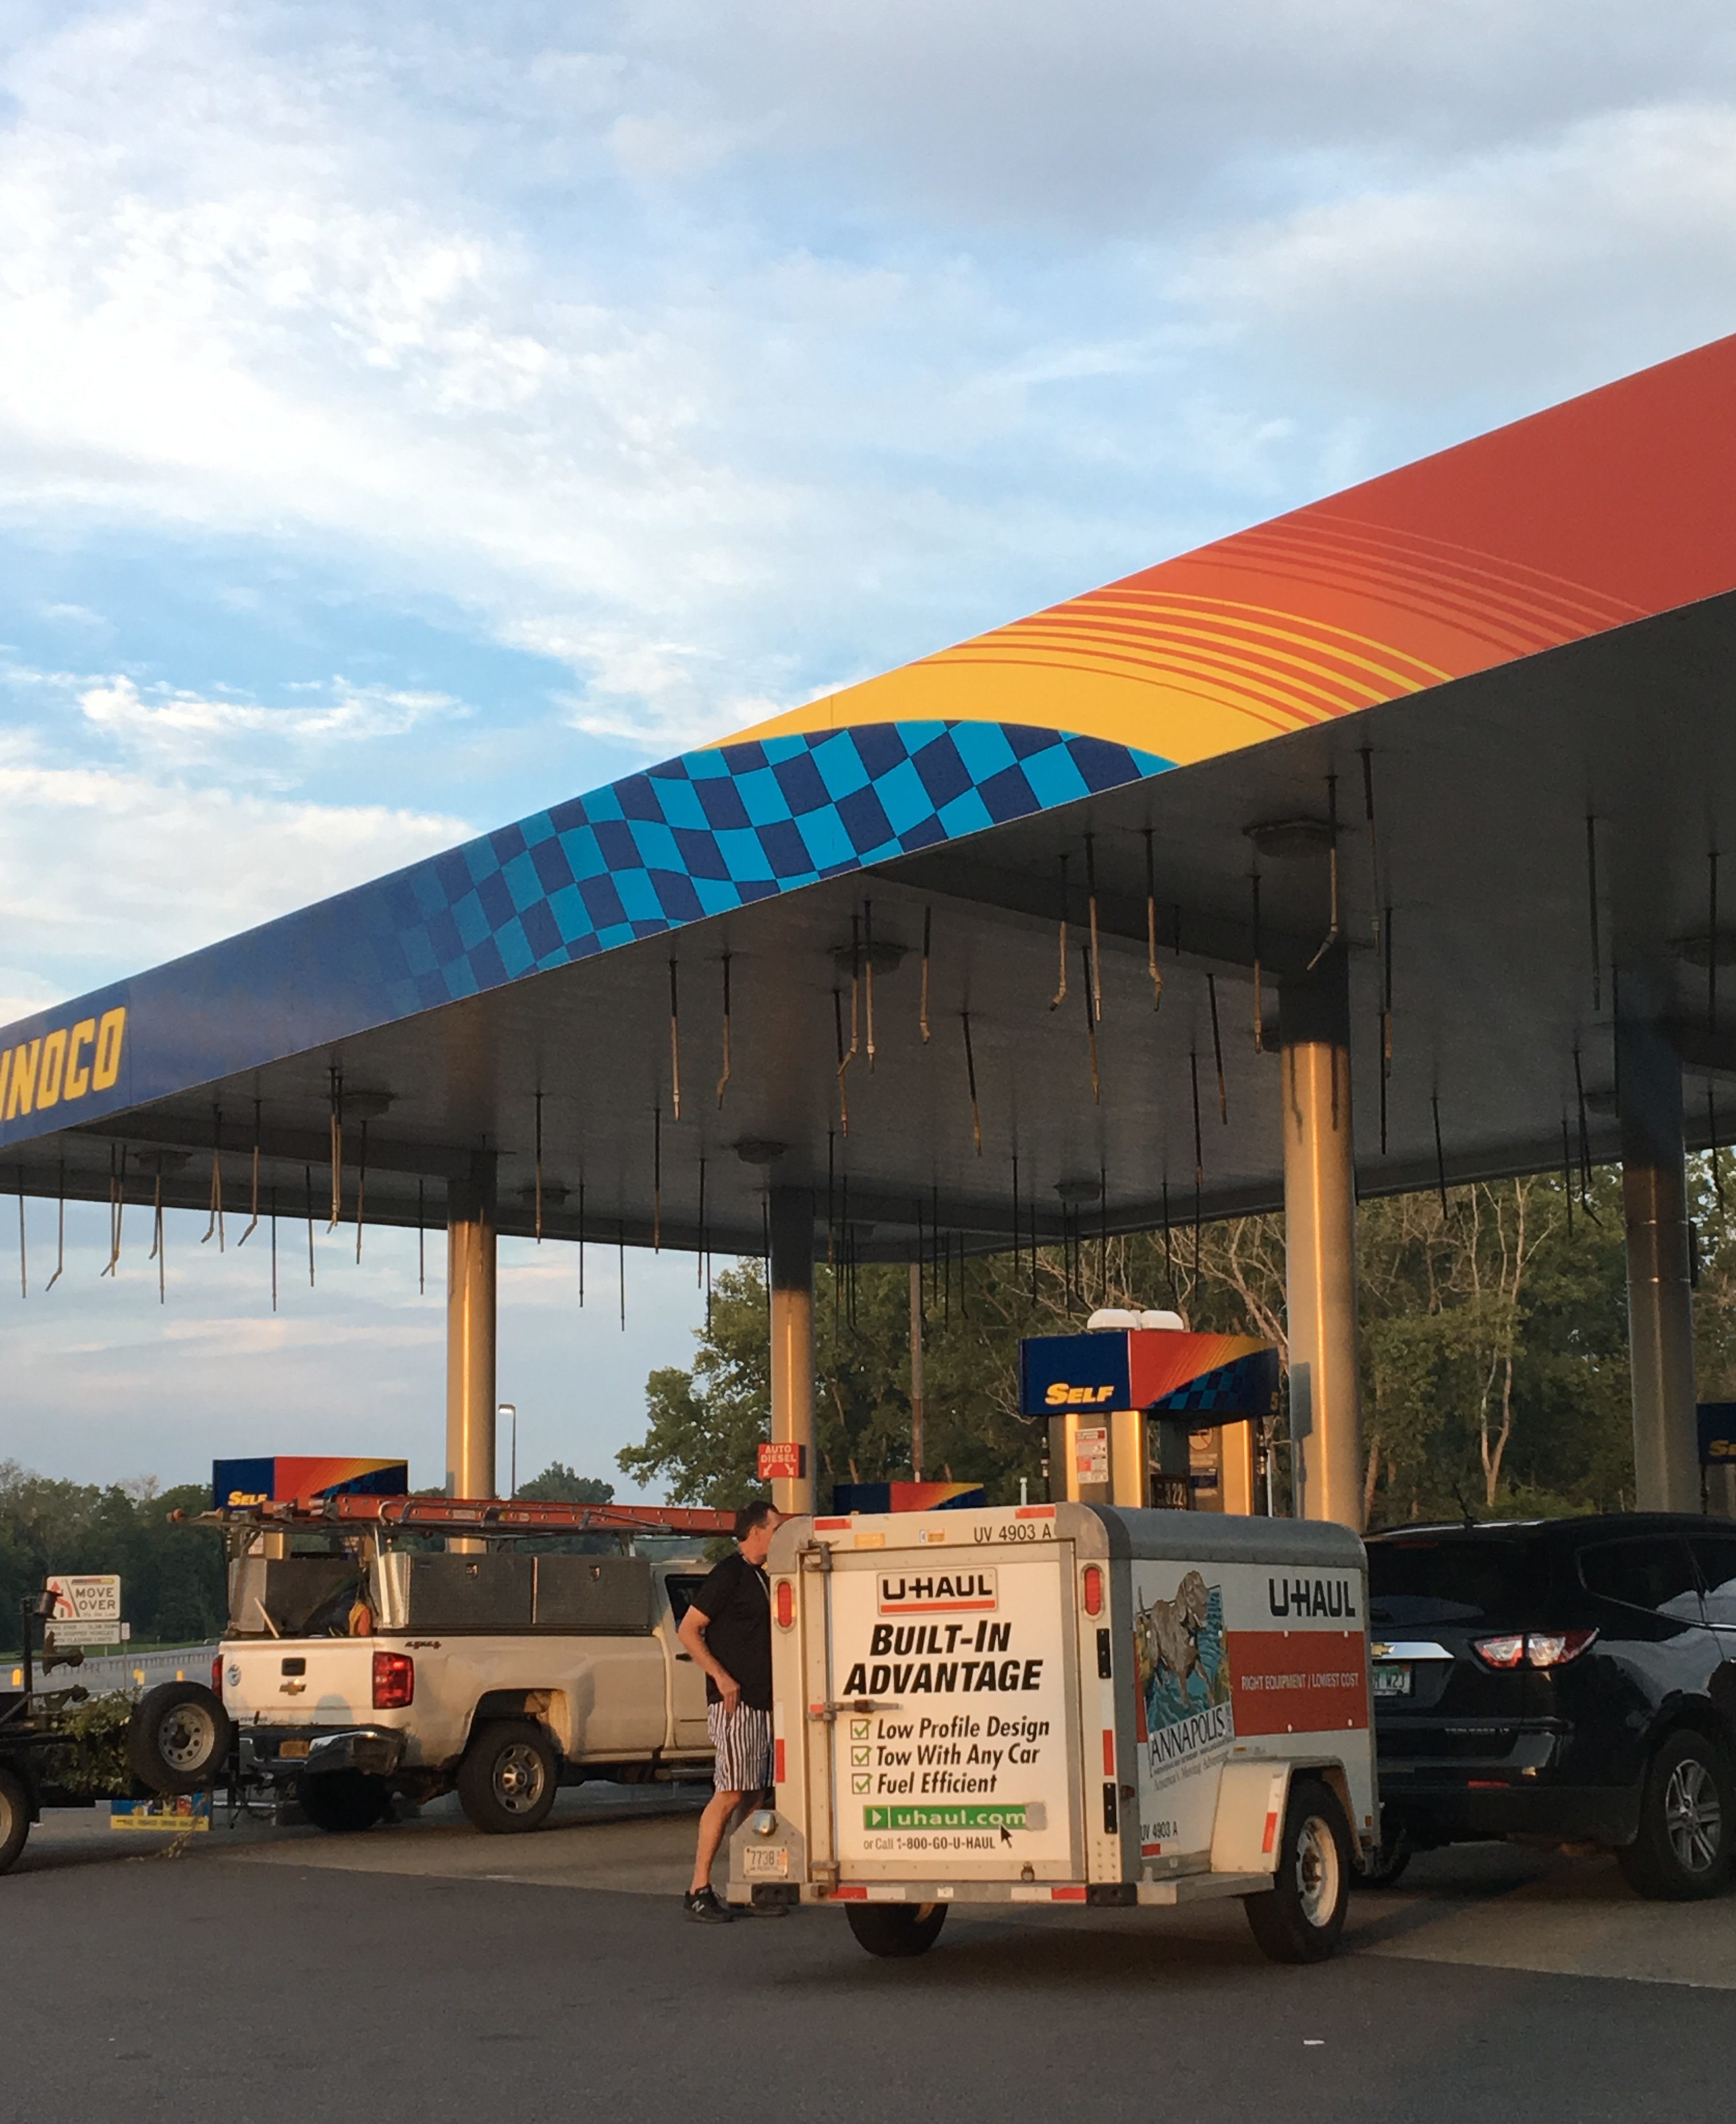 An image of a gas station. In front of it, attached to a truck which is out of frame, is a U-HAUL box smaller than the average car.